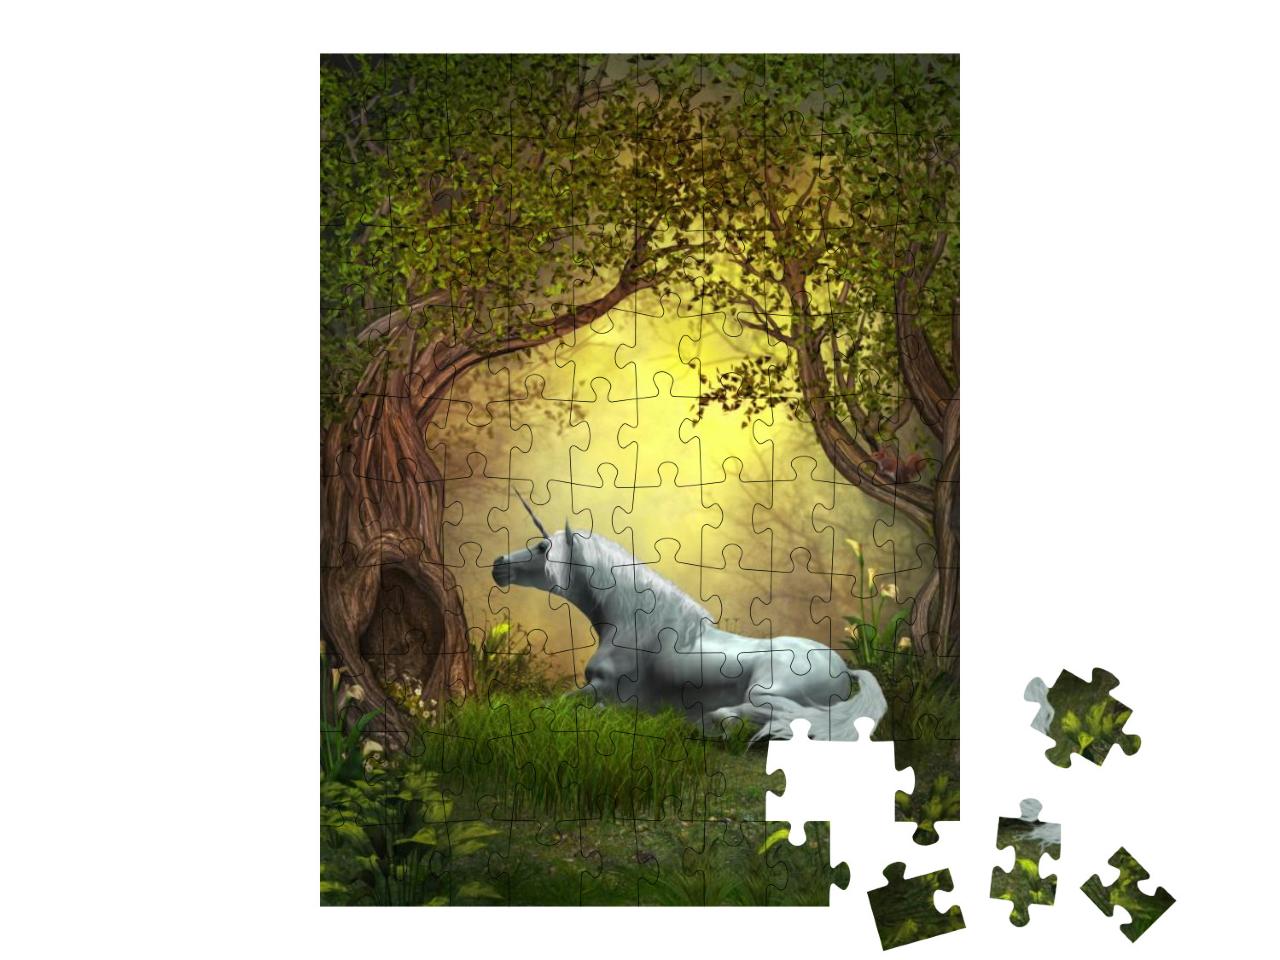 Woodland Unicorn - a Squirrel Watches a White Unicorn Res... Jigsaw Puzzle with 100 pieces